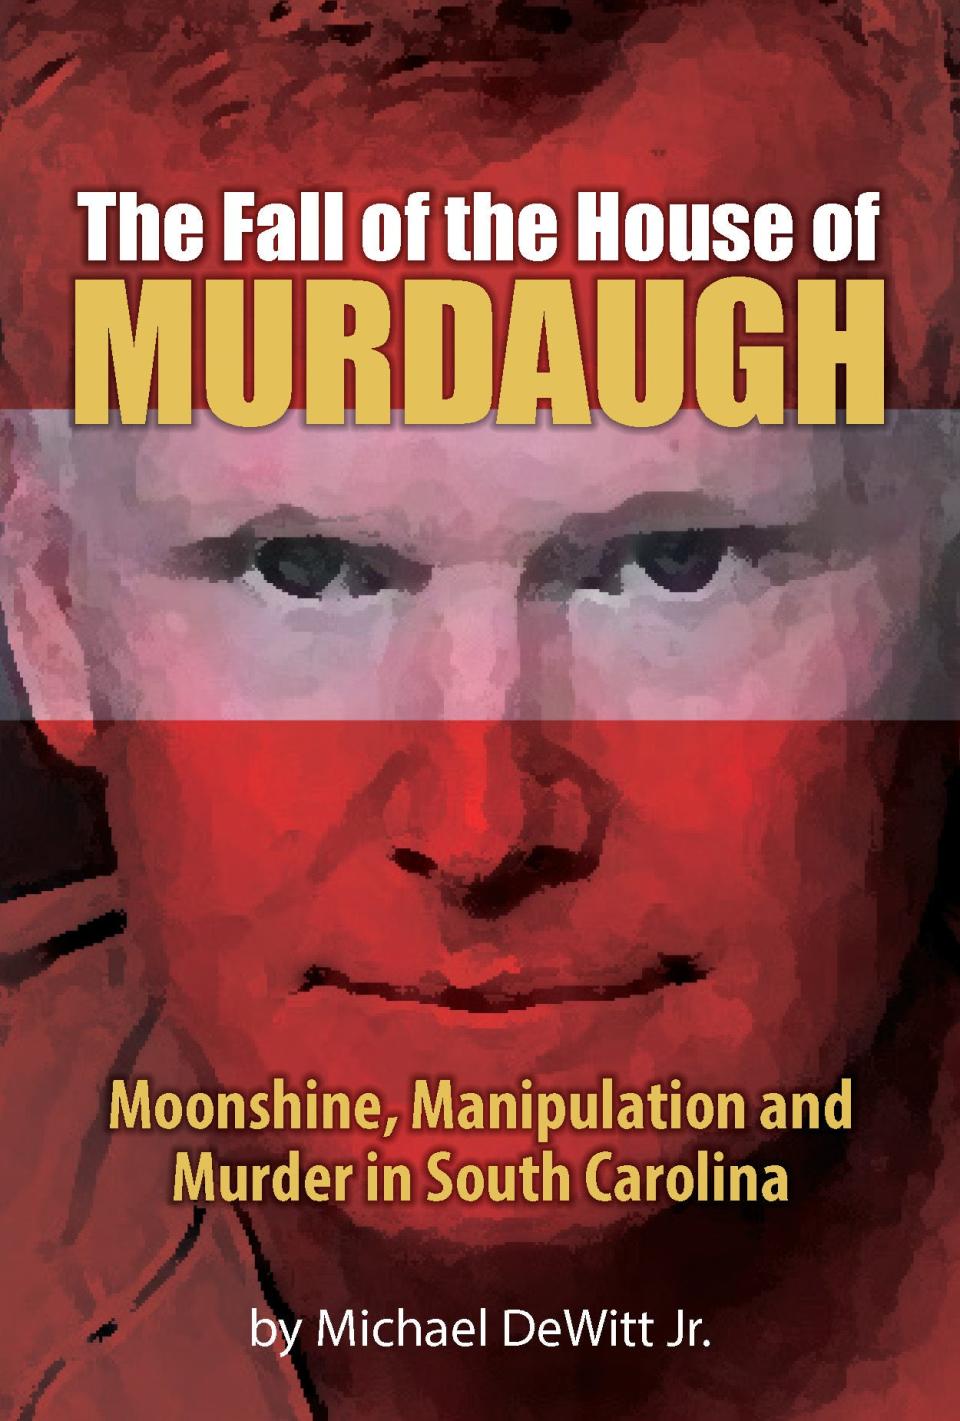 The cover of Michael DeWitt Jr.'s historical, true-crime epic, The Fall of the House of Murdaugh.